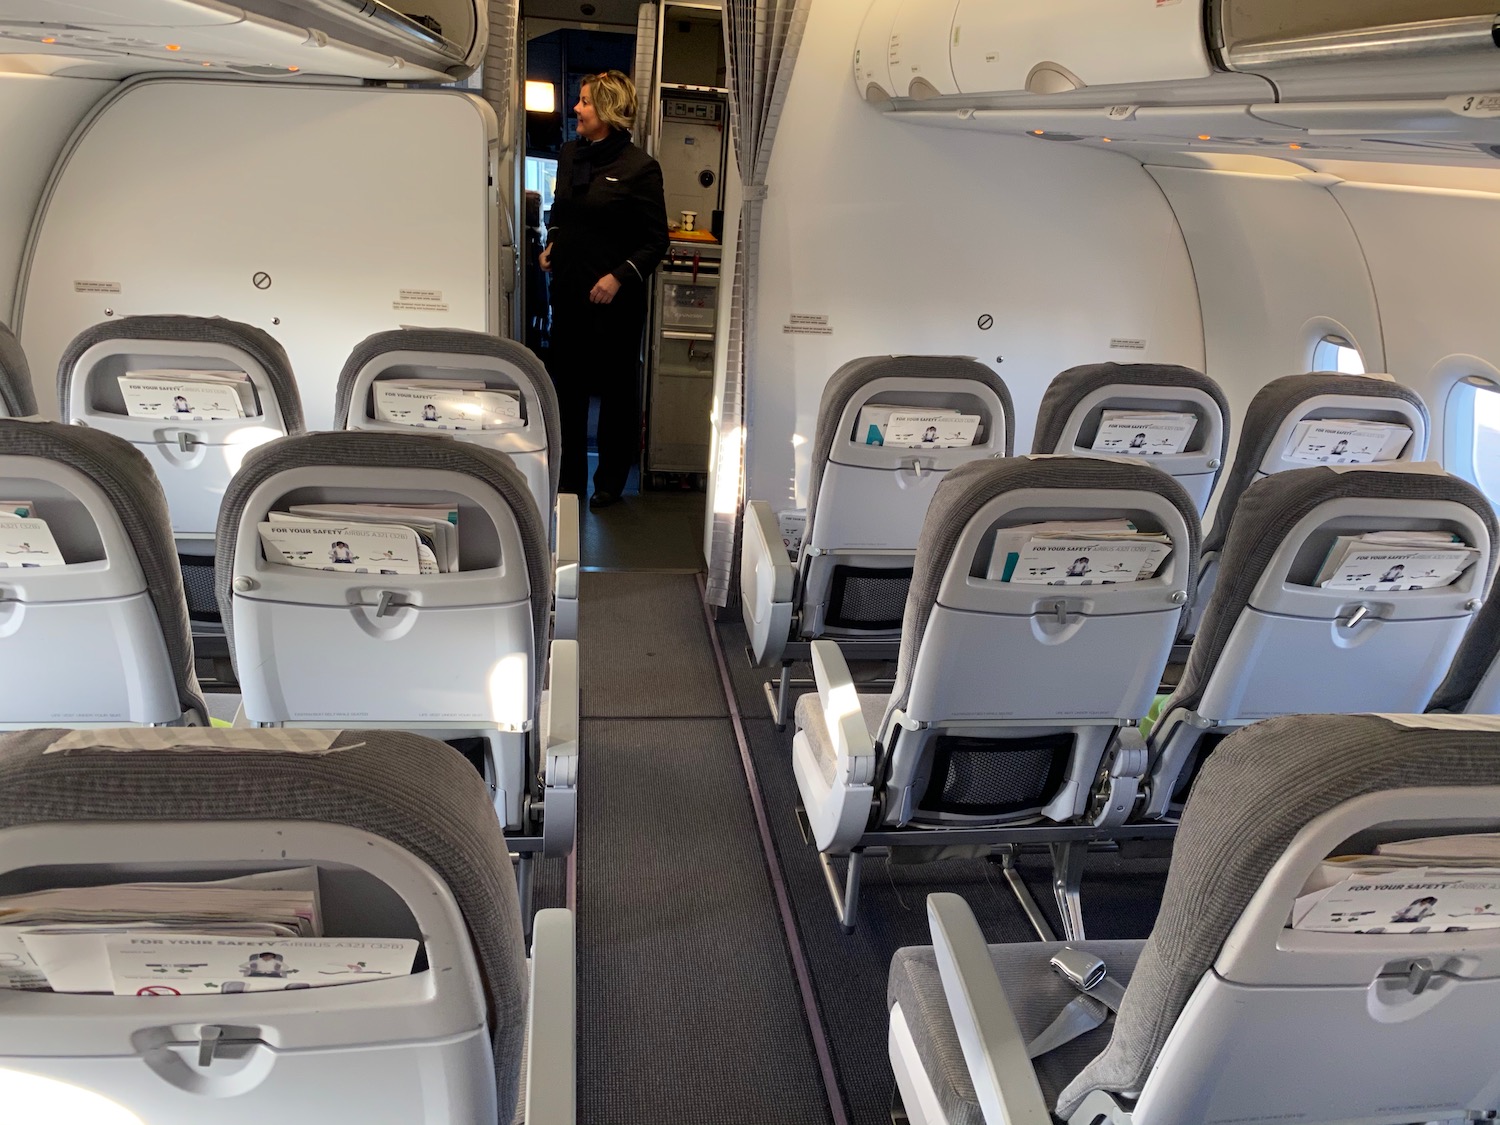 Review: Finnair A321 Business Class - Live and Let's Fly